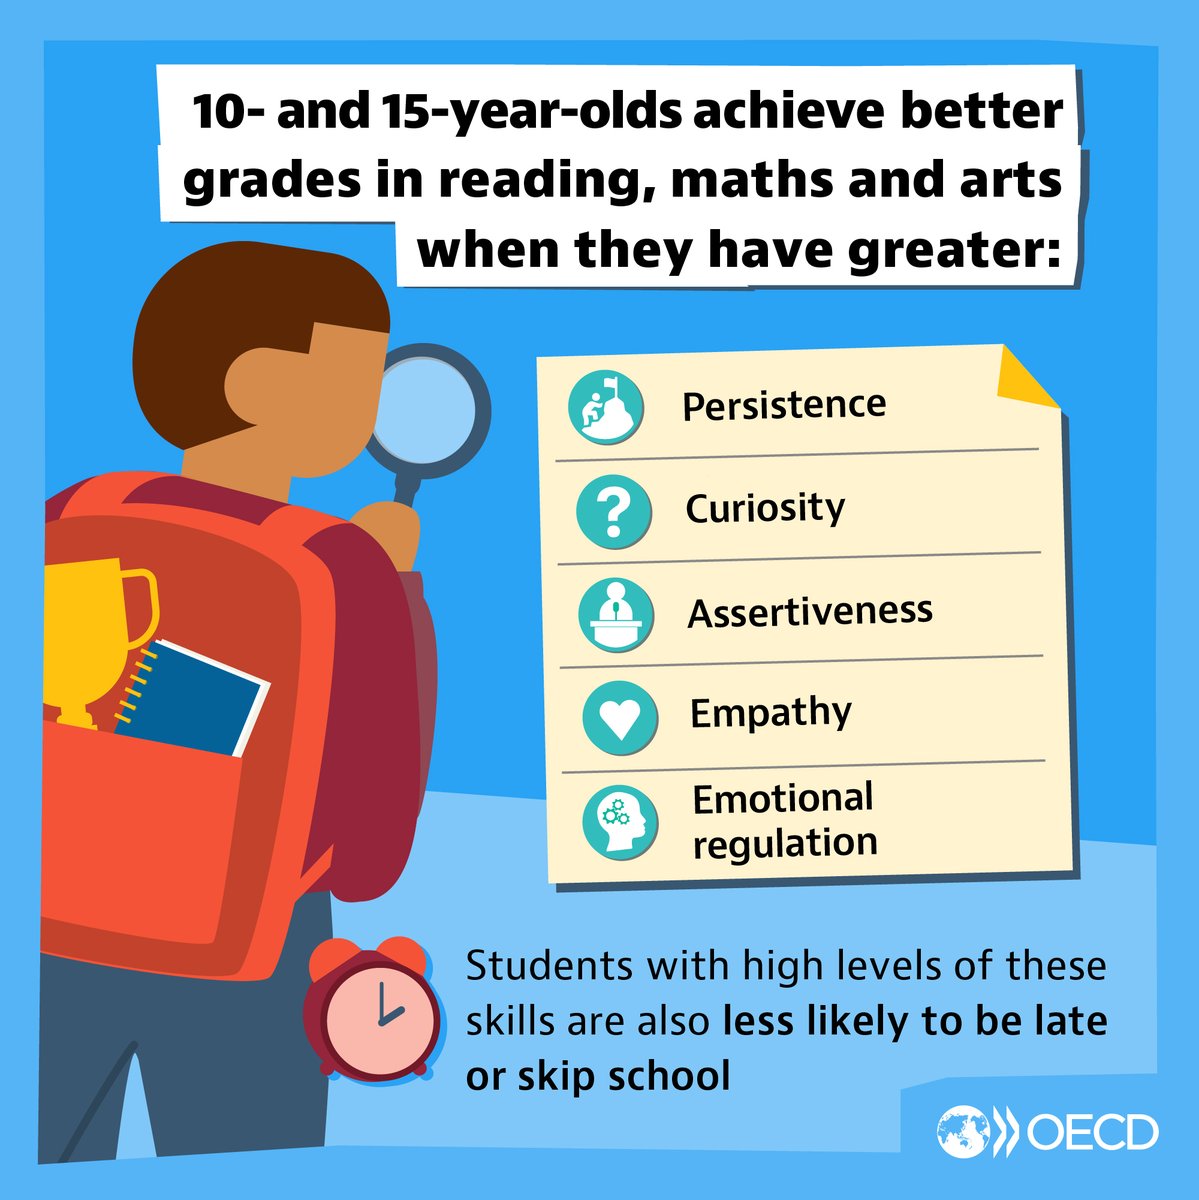 Did you know? Certain social and emotional skills are linked to academic outcomes. Students who are more curious and persistent often do better in school. How can we foster these skills? Read the new OECD Survey on Social and Emotional Skills 👉 oe.cd/il/5wl